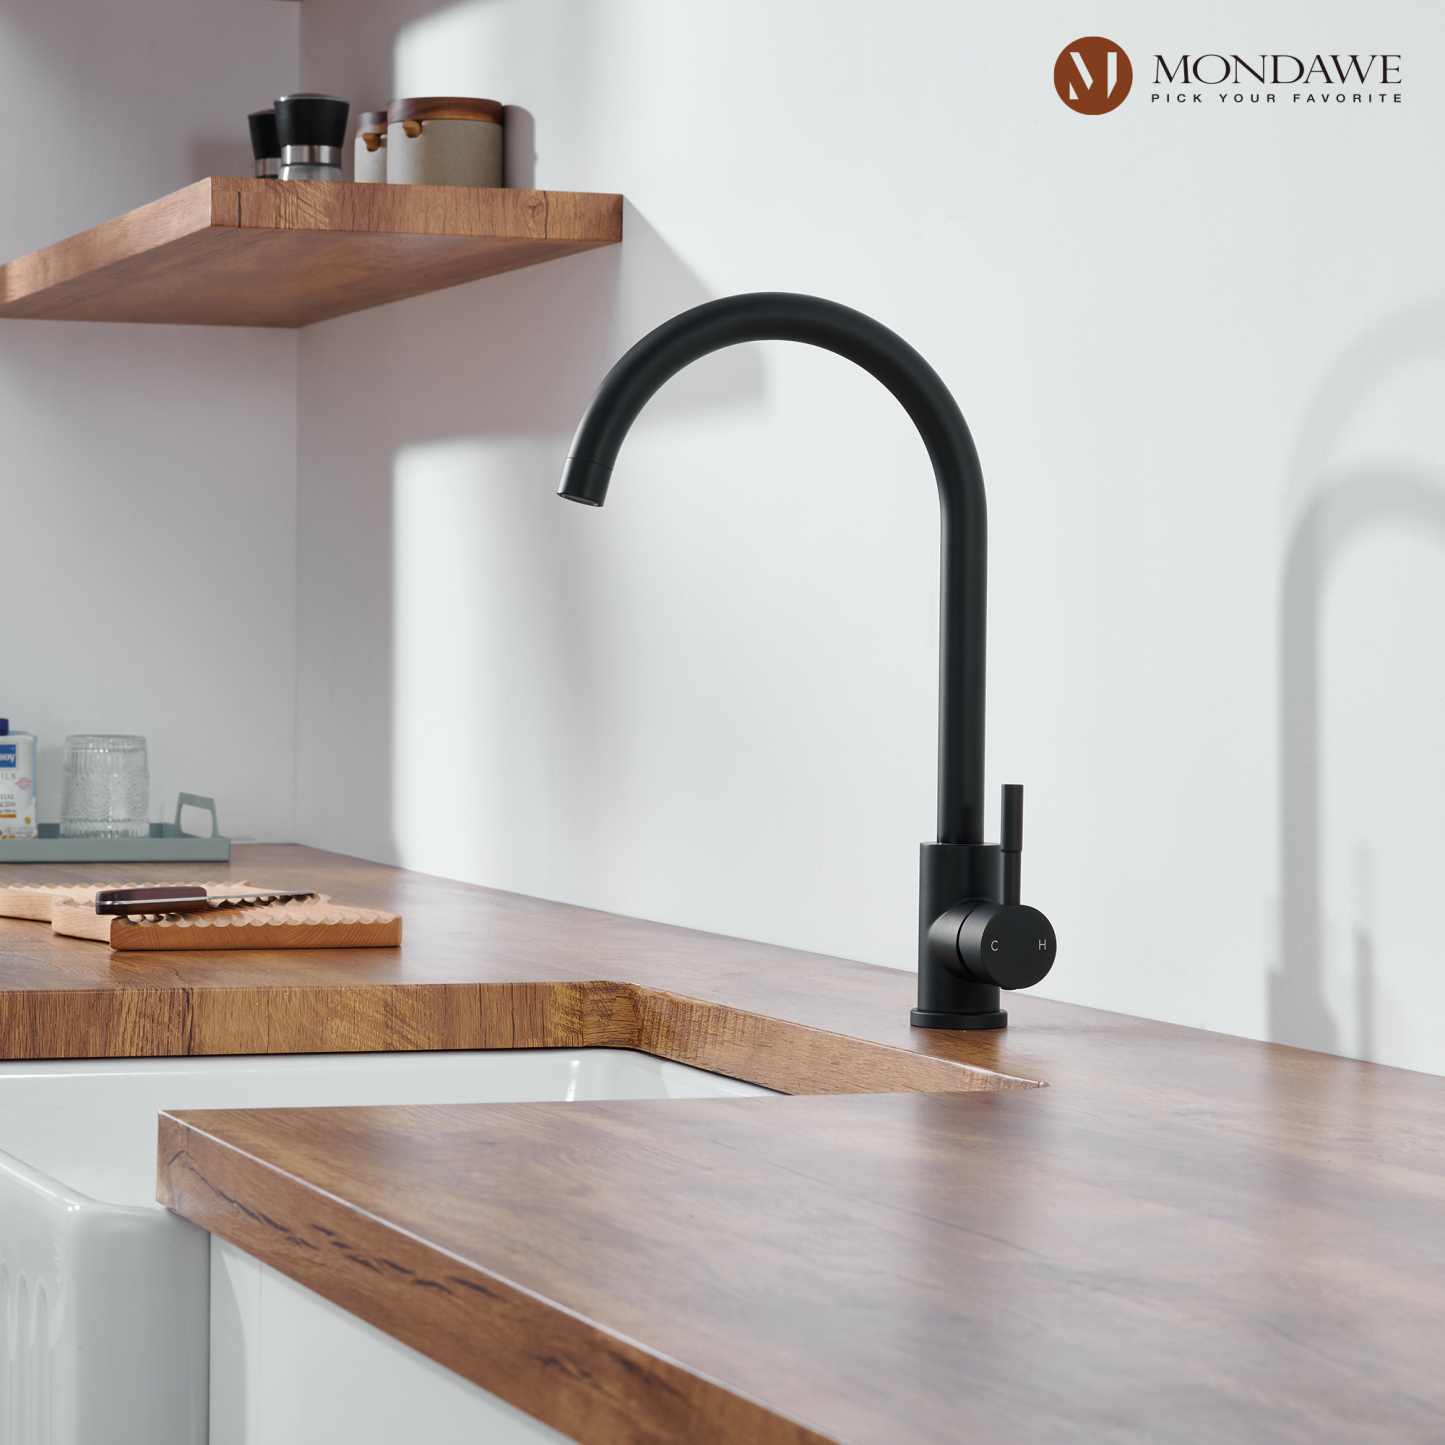 High Arc Pull Down Single Handle Kitchen Faucet with Accessories-Mondawe